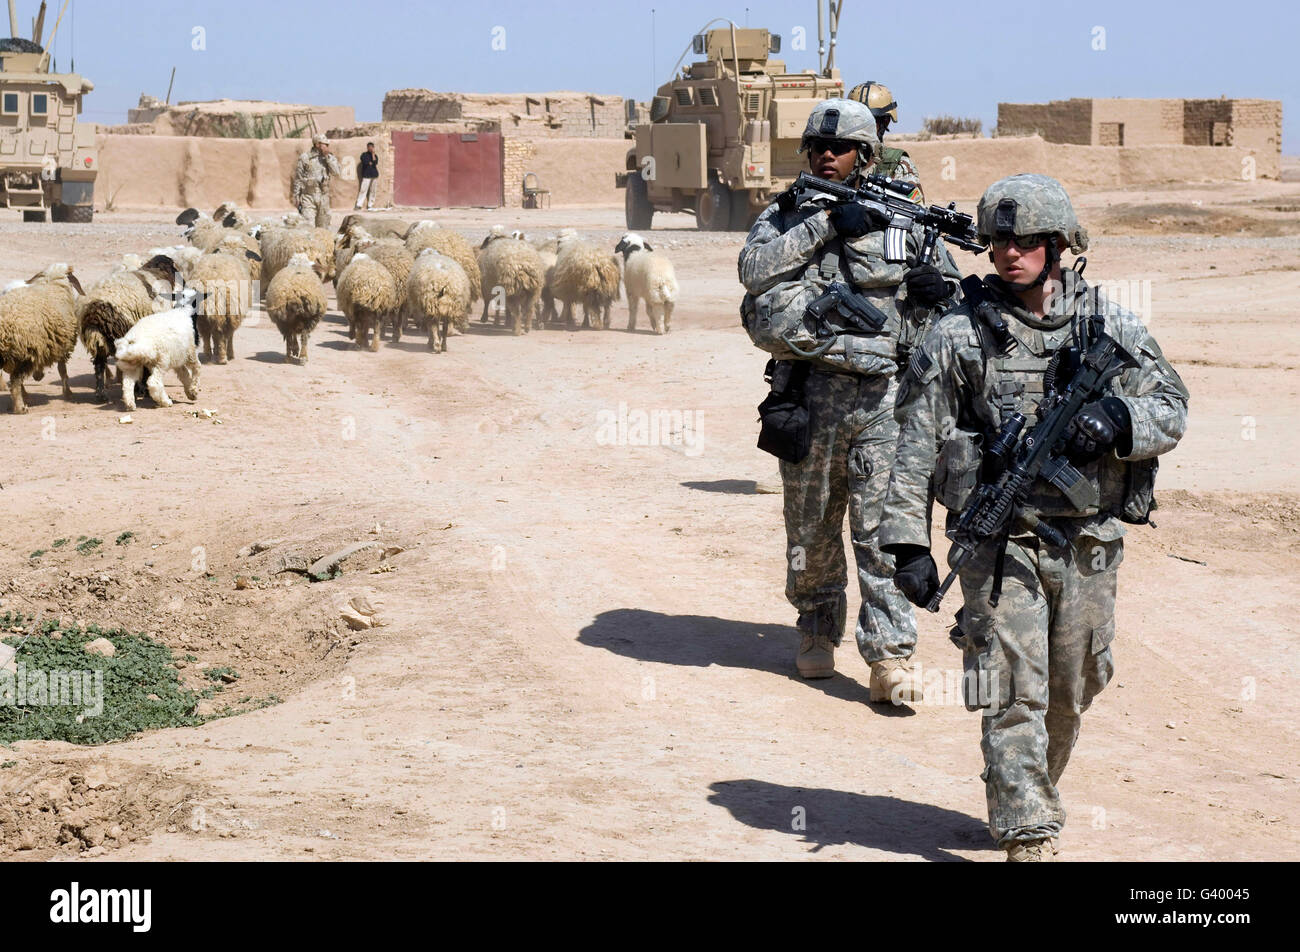 U.S. Army soldiers providing security while fellow soldiers provide humanitarian aid to villagers in Shuzayf, Iraq. Stock Photo